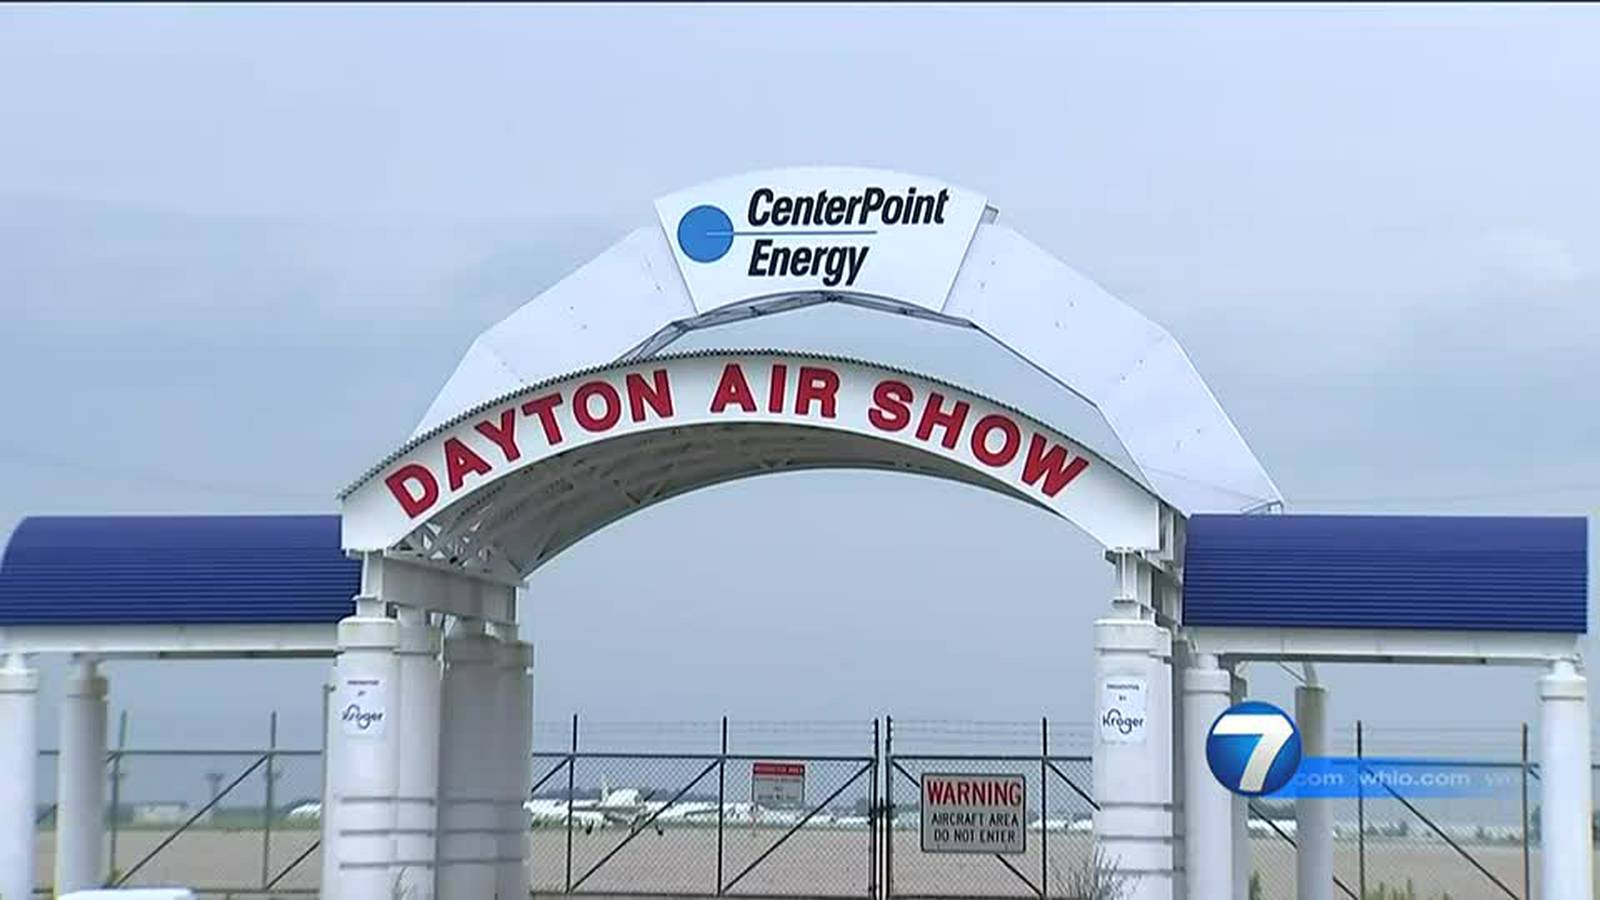 Dayton air show aims to build new parking area after recent parking